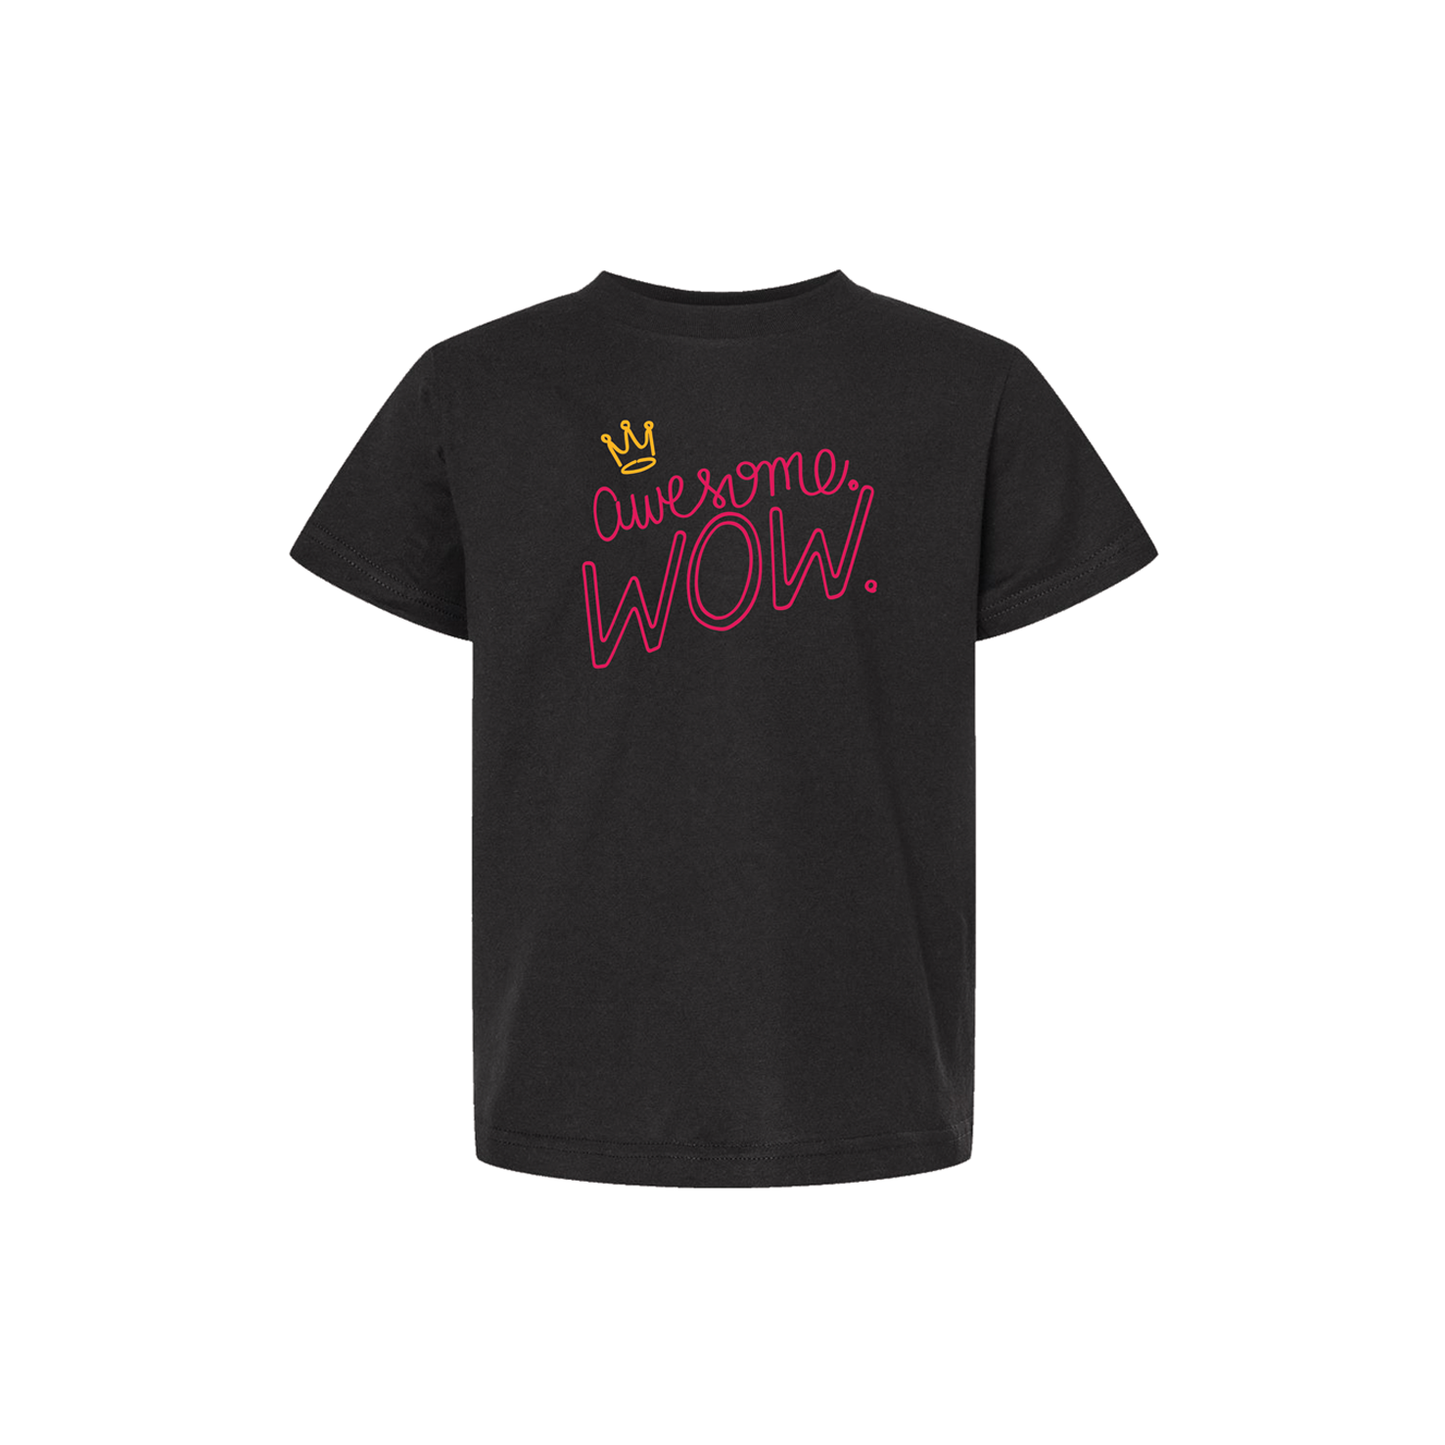 HAMILTON Awesome Wow Youth Tee